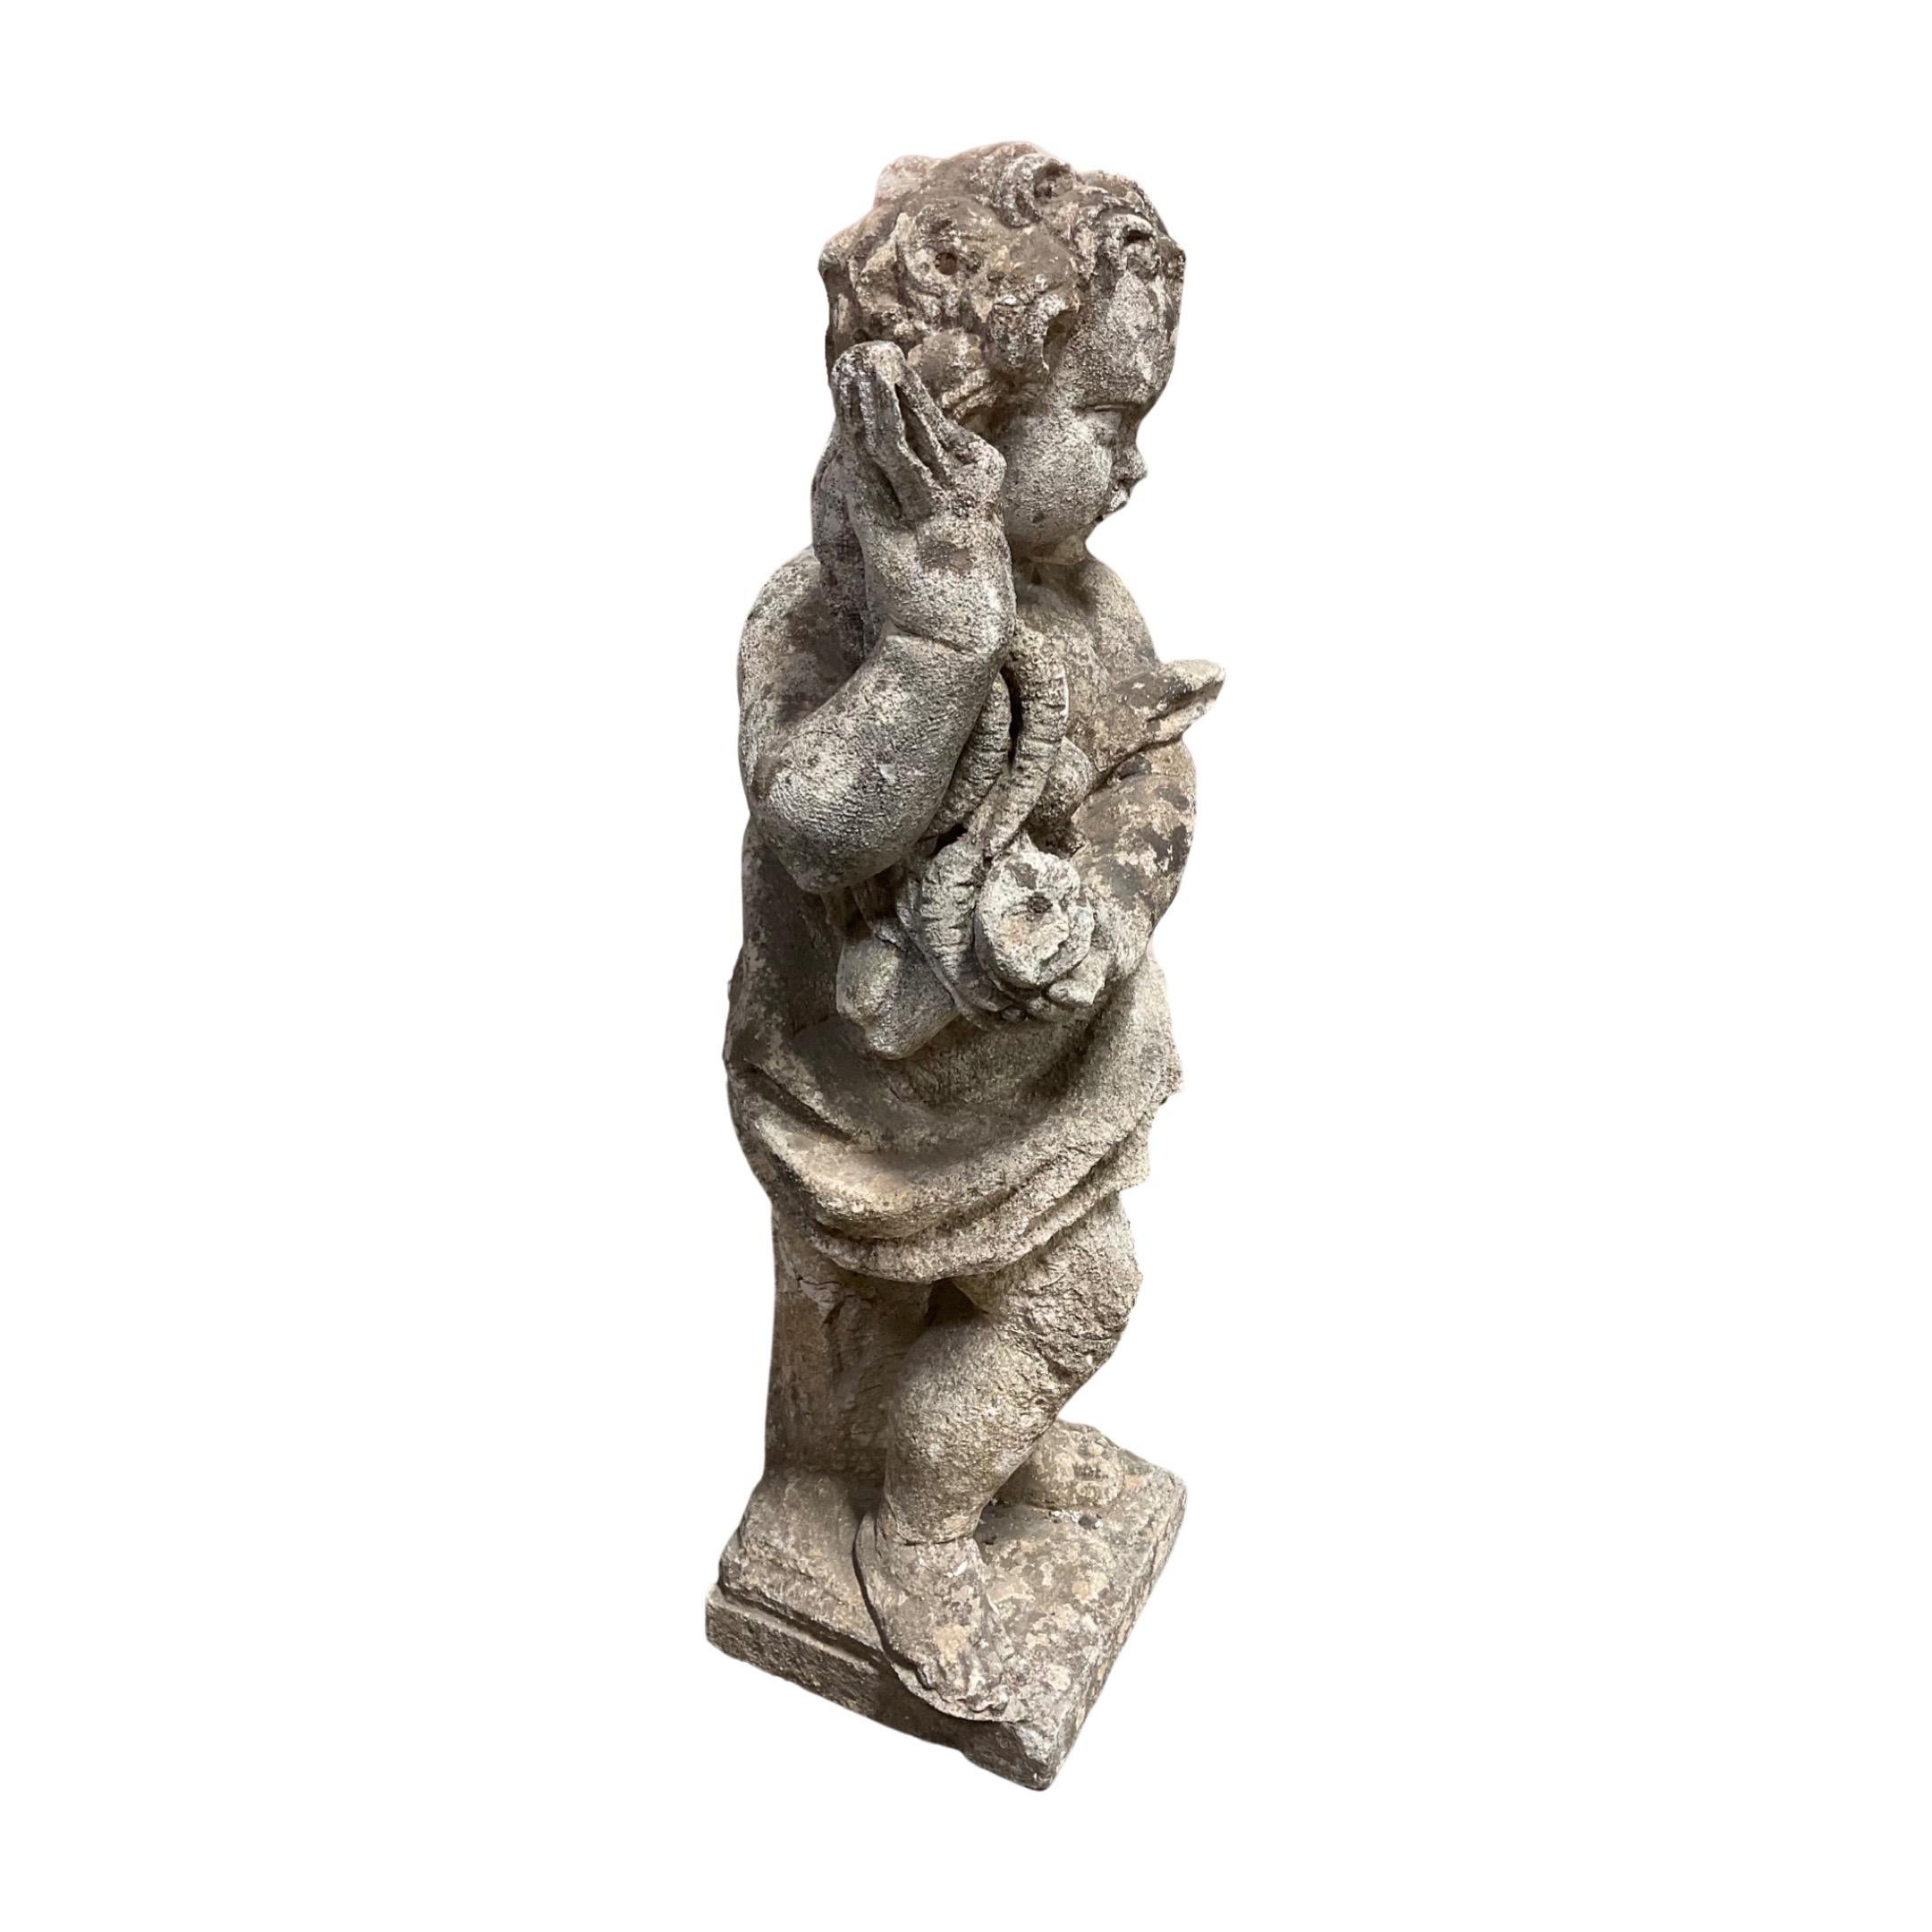 Bring a touch of history to your décor with this English Limestone Cherub Sculpture, crafted from durable limestone in 1890. This intricate carving of a cherub is the perfect accent piece for adding a timeless aesthetic to any home or office.